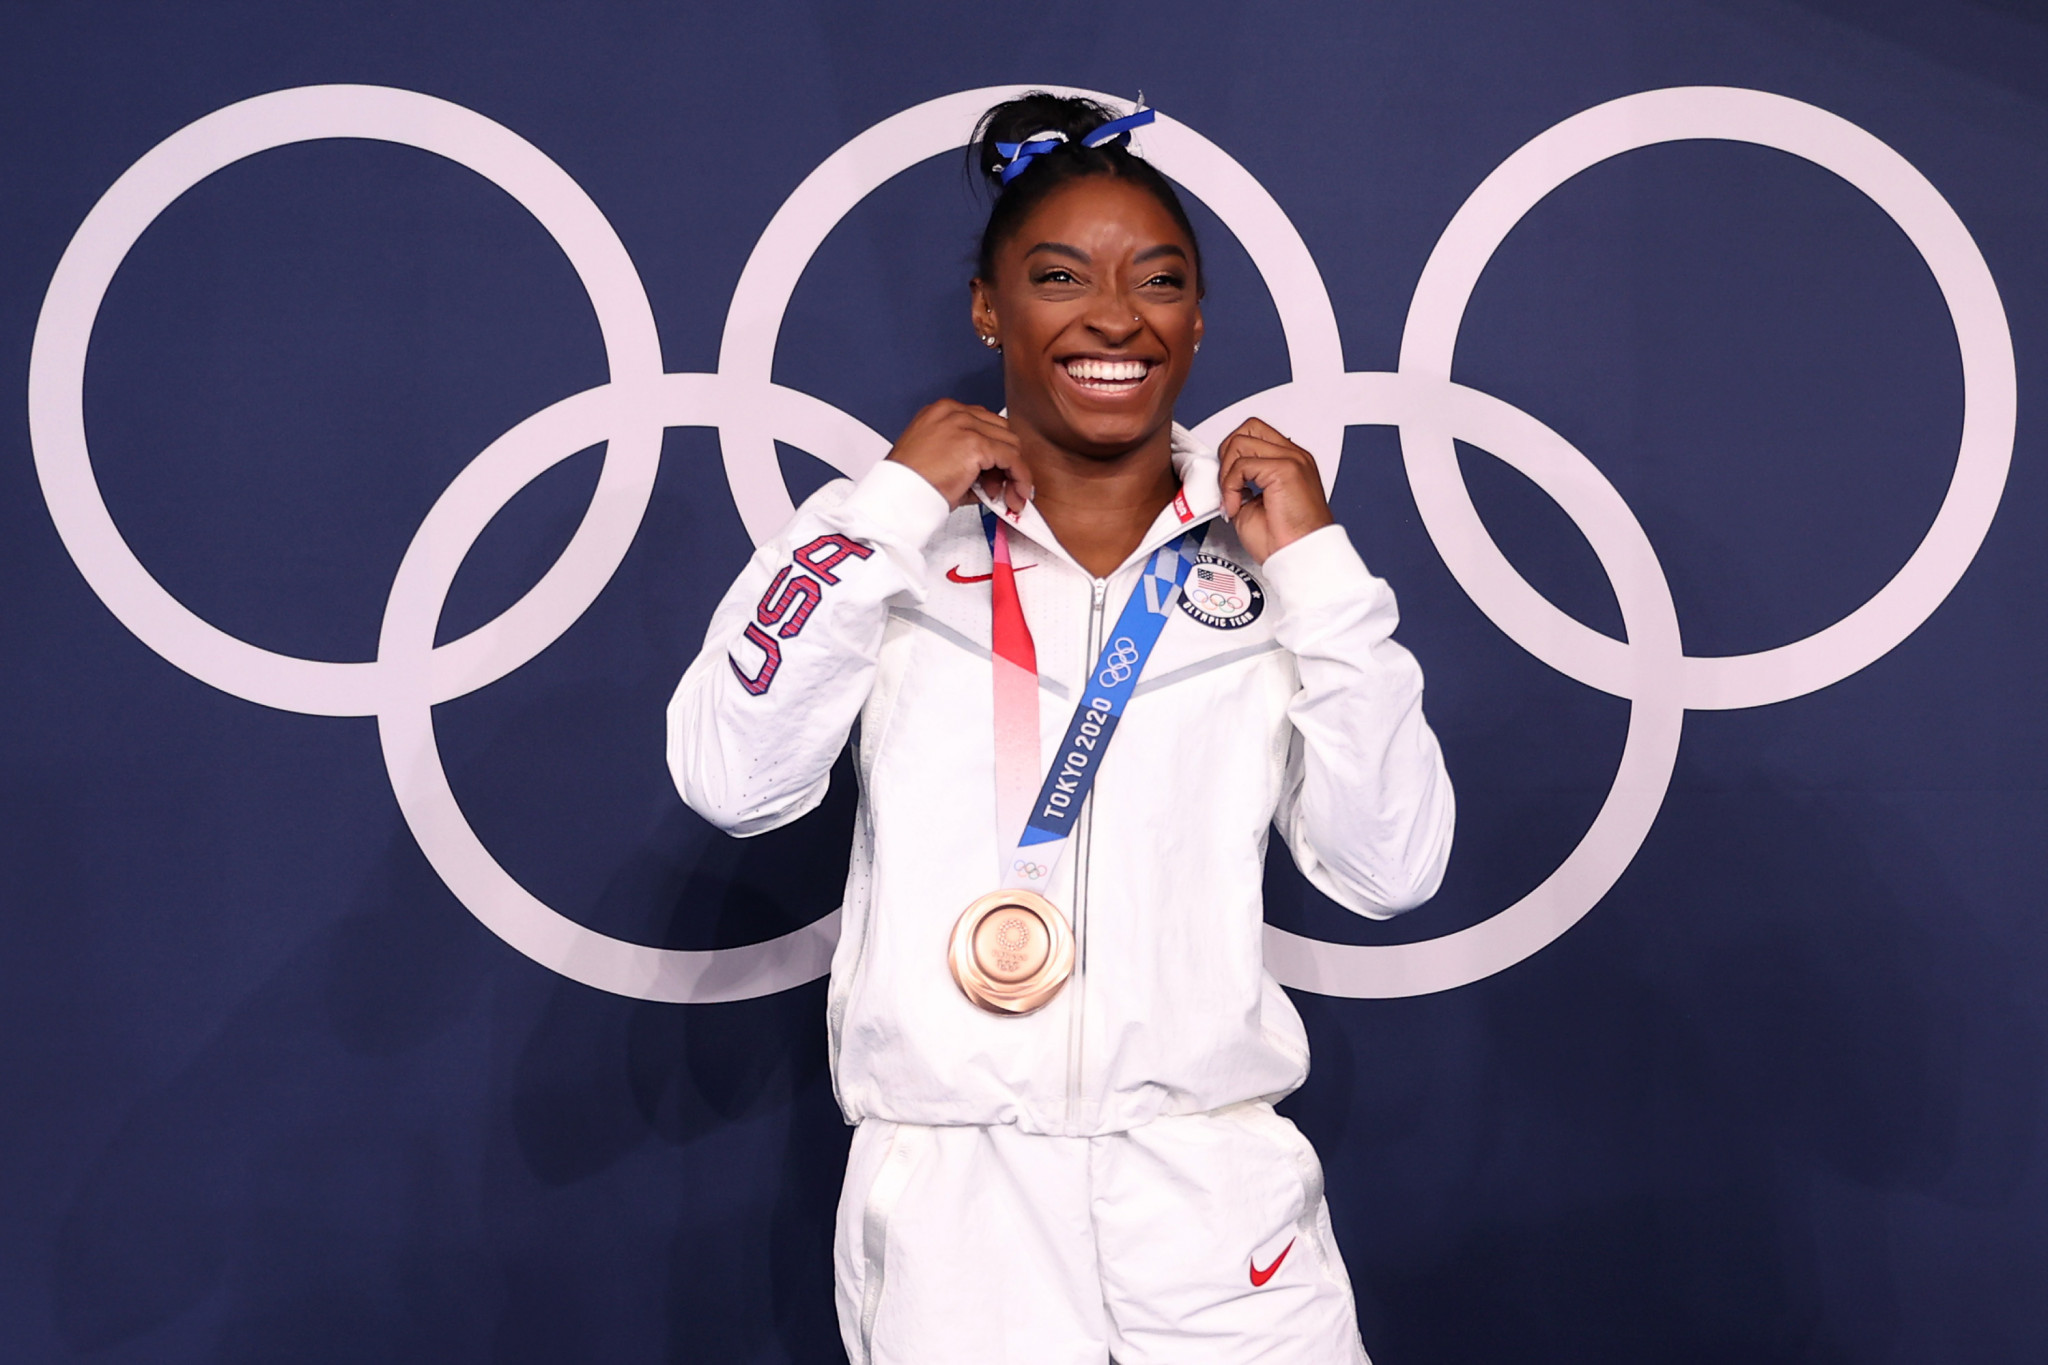 Simone Biles withdrew from most of her events at Tokyo 2020 with the 